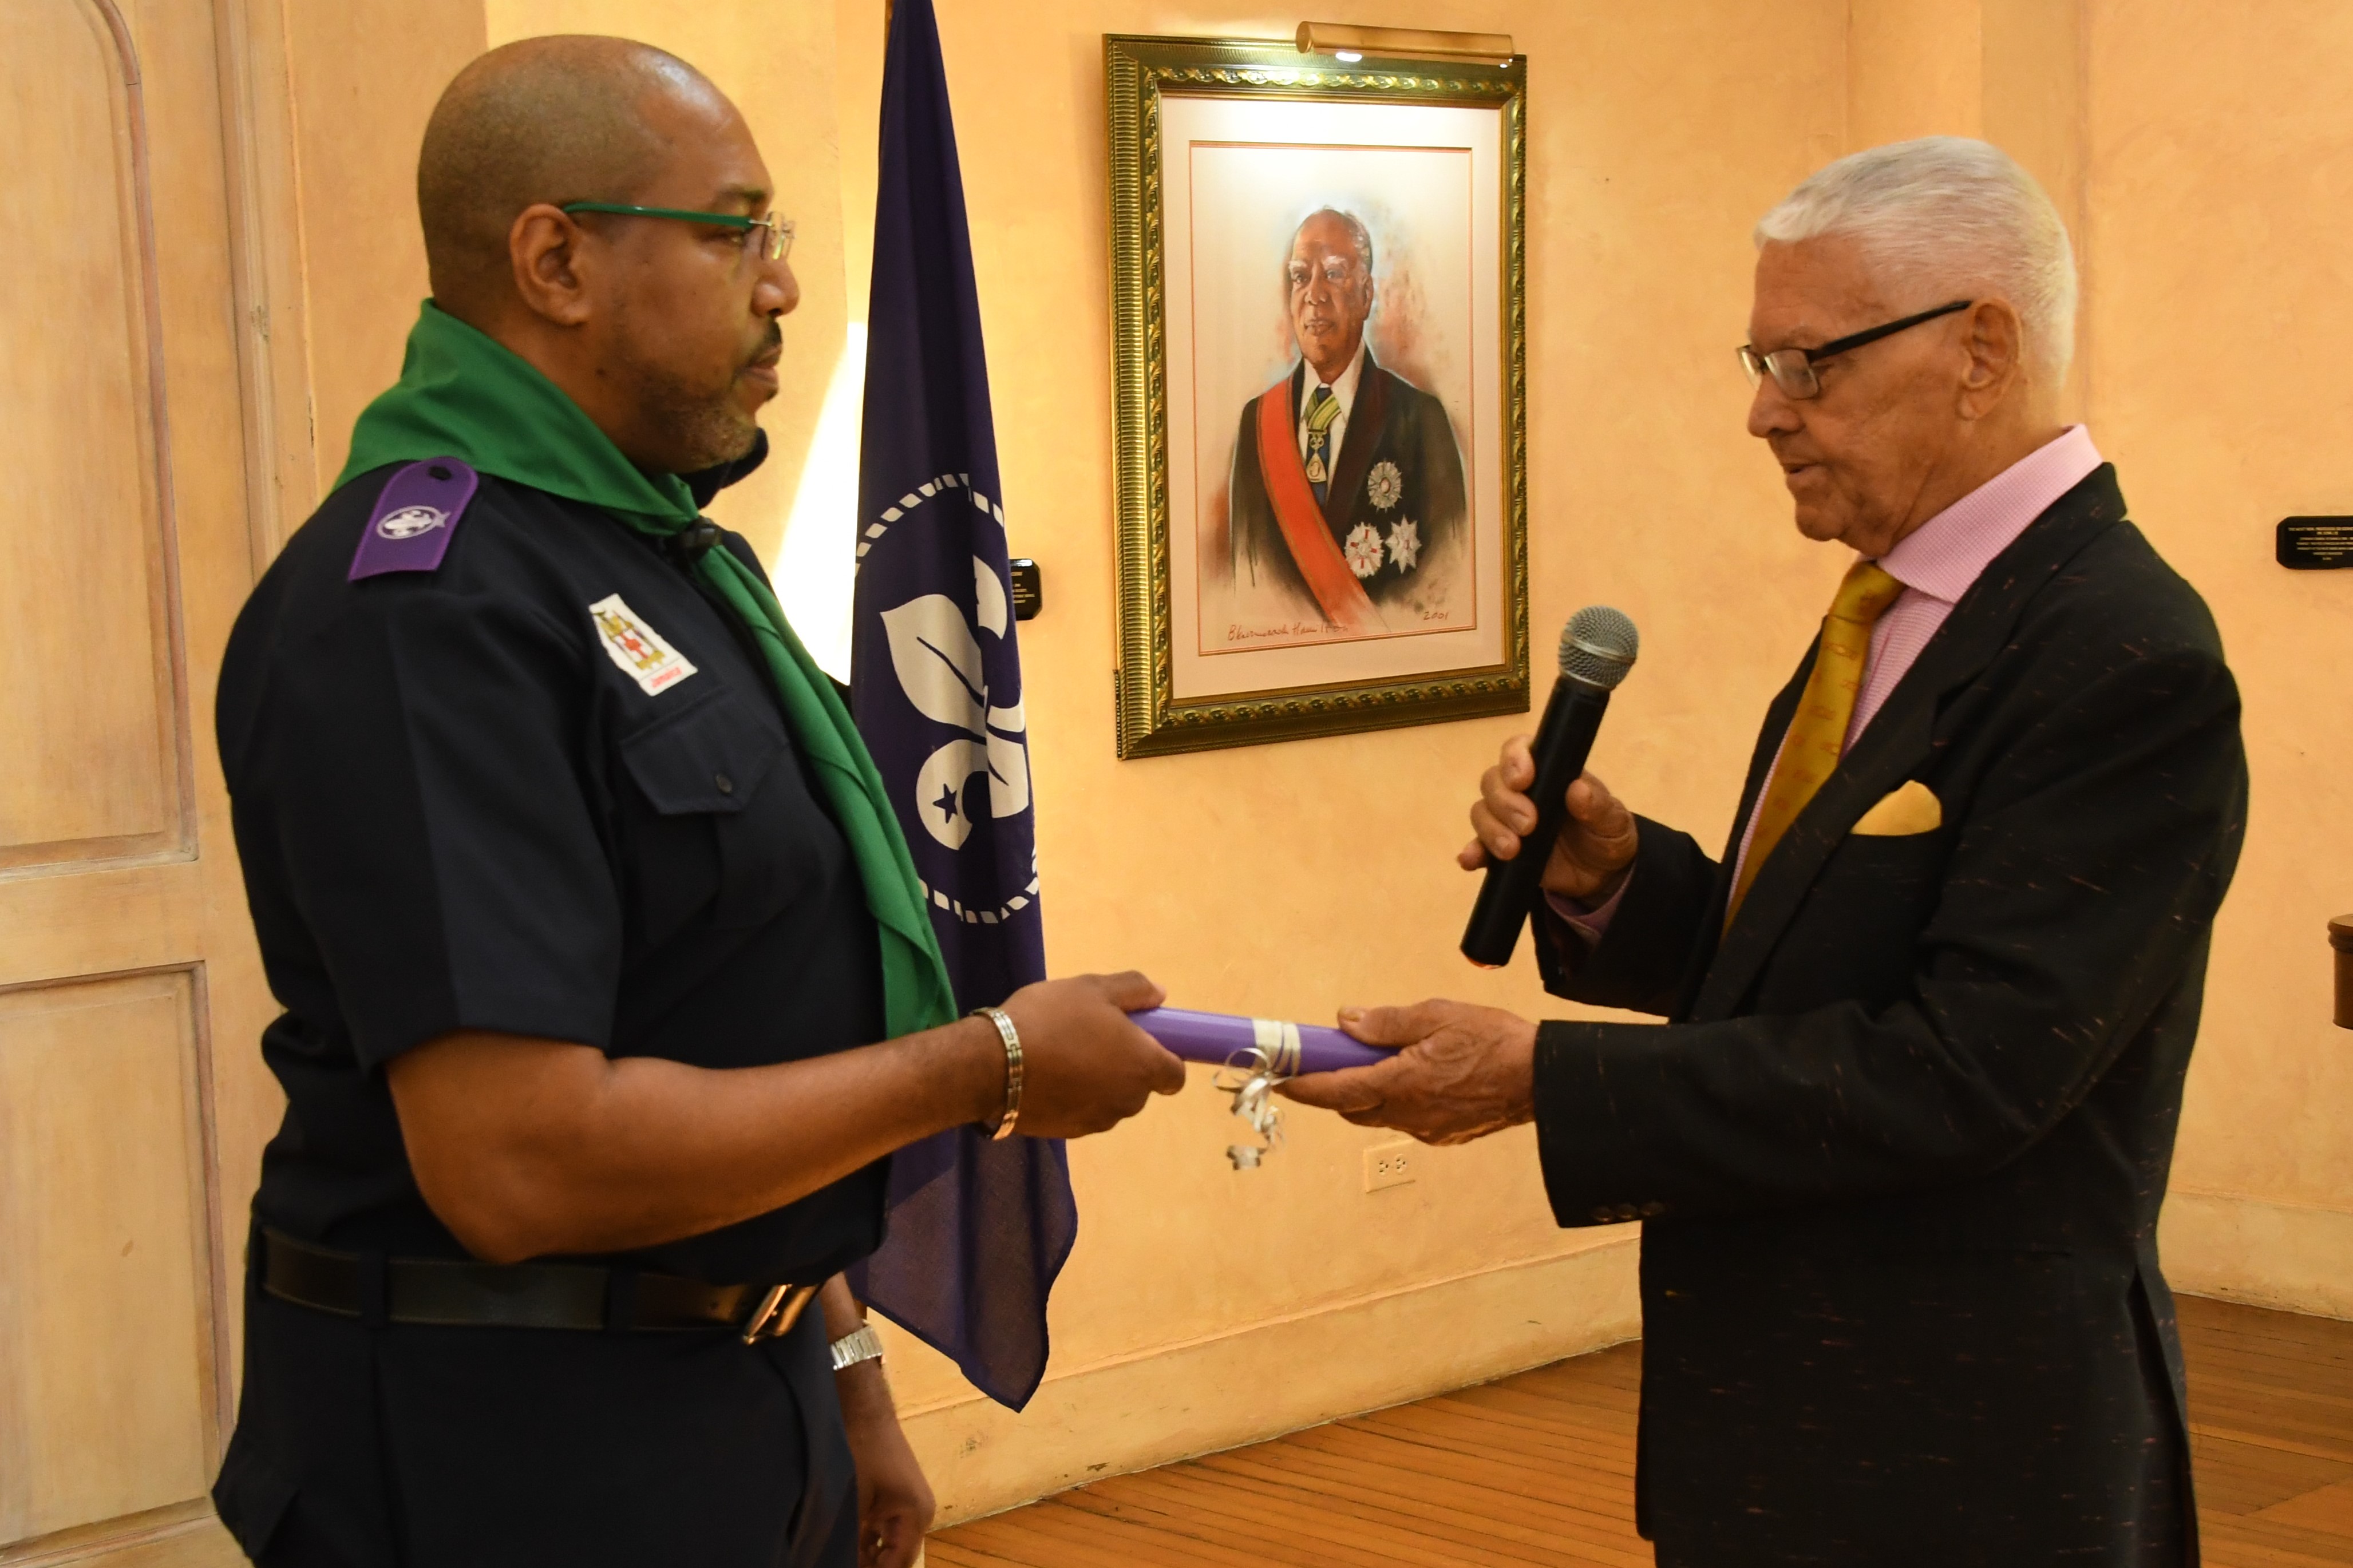 Changing of the Guard as outgoing President the Honourable Oliver Jones passes the baton to Mr. Richard Simpson, newly appointed President of the Scout Association of Jamaica.